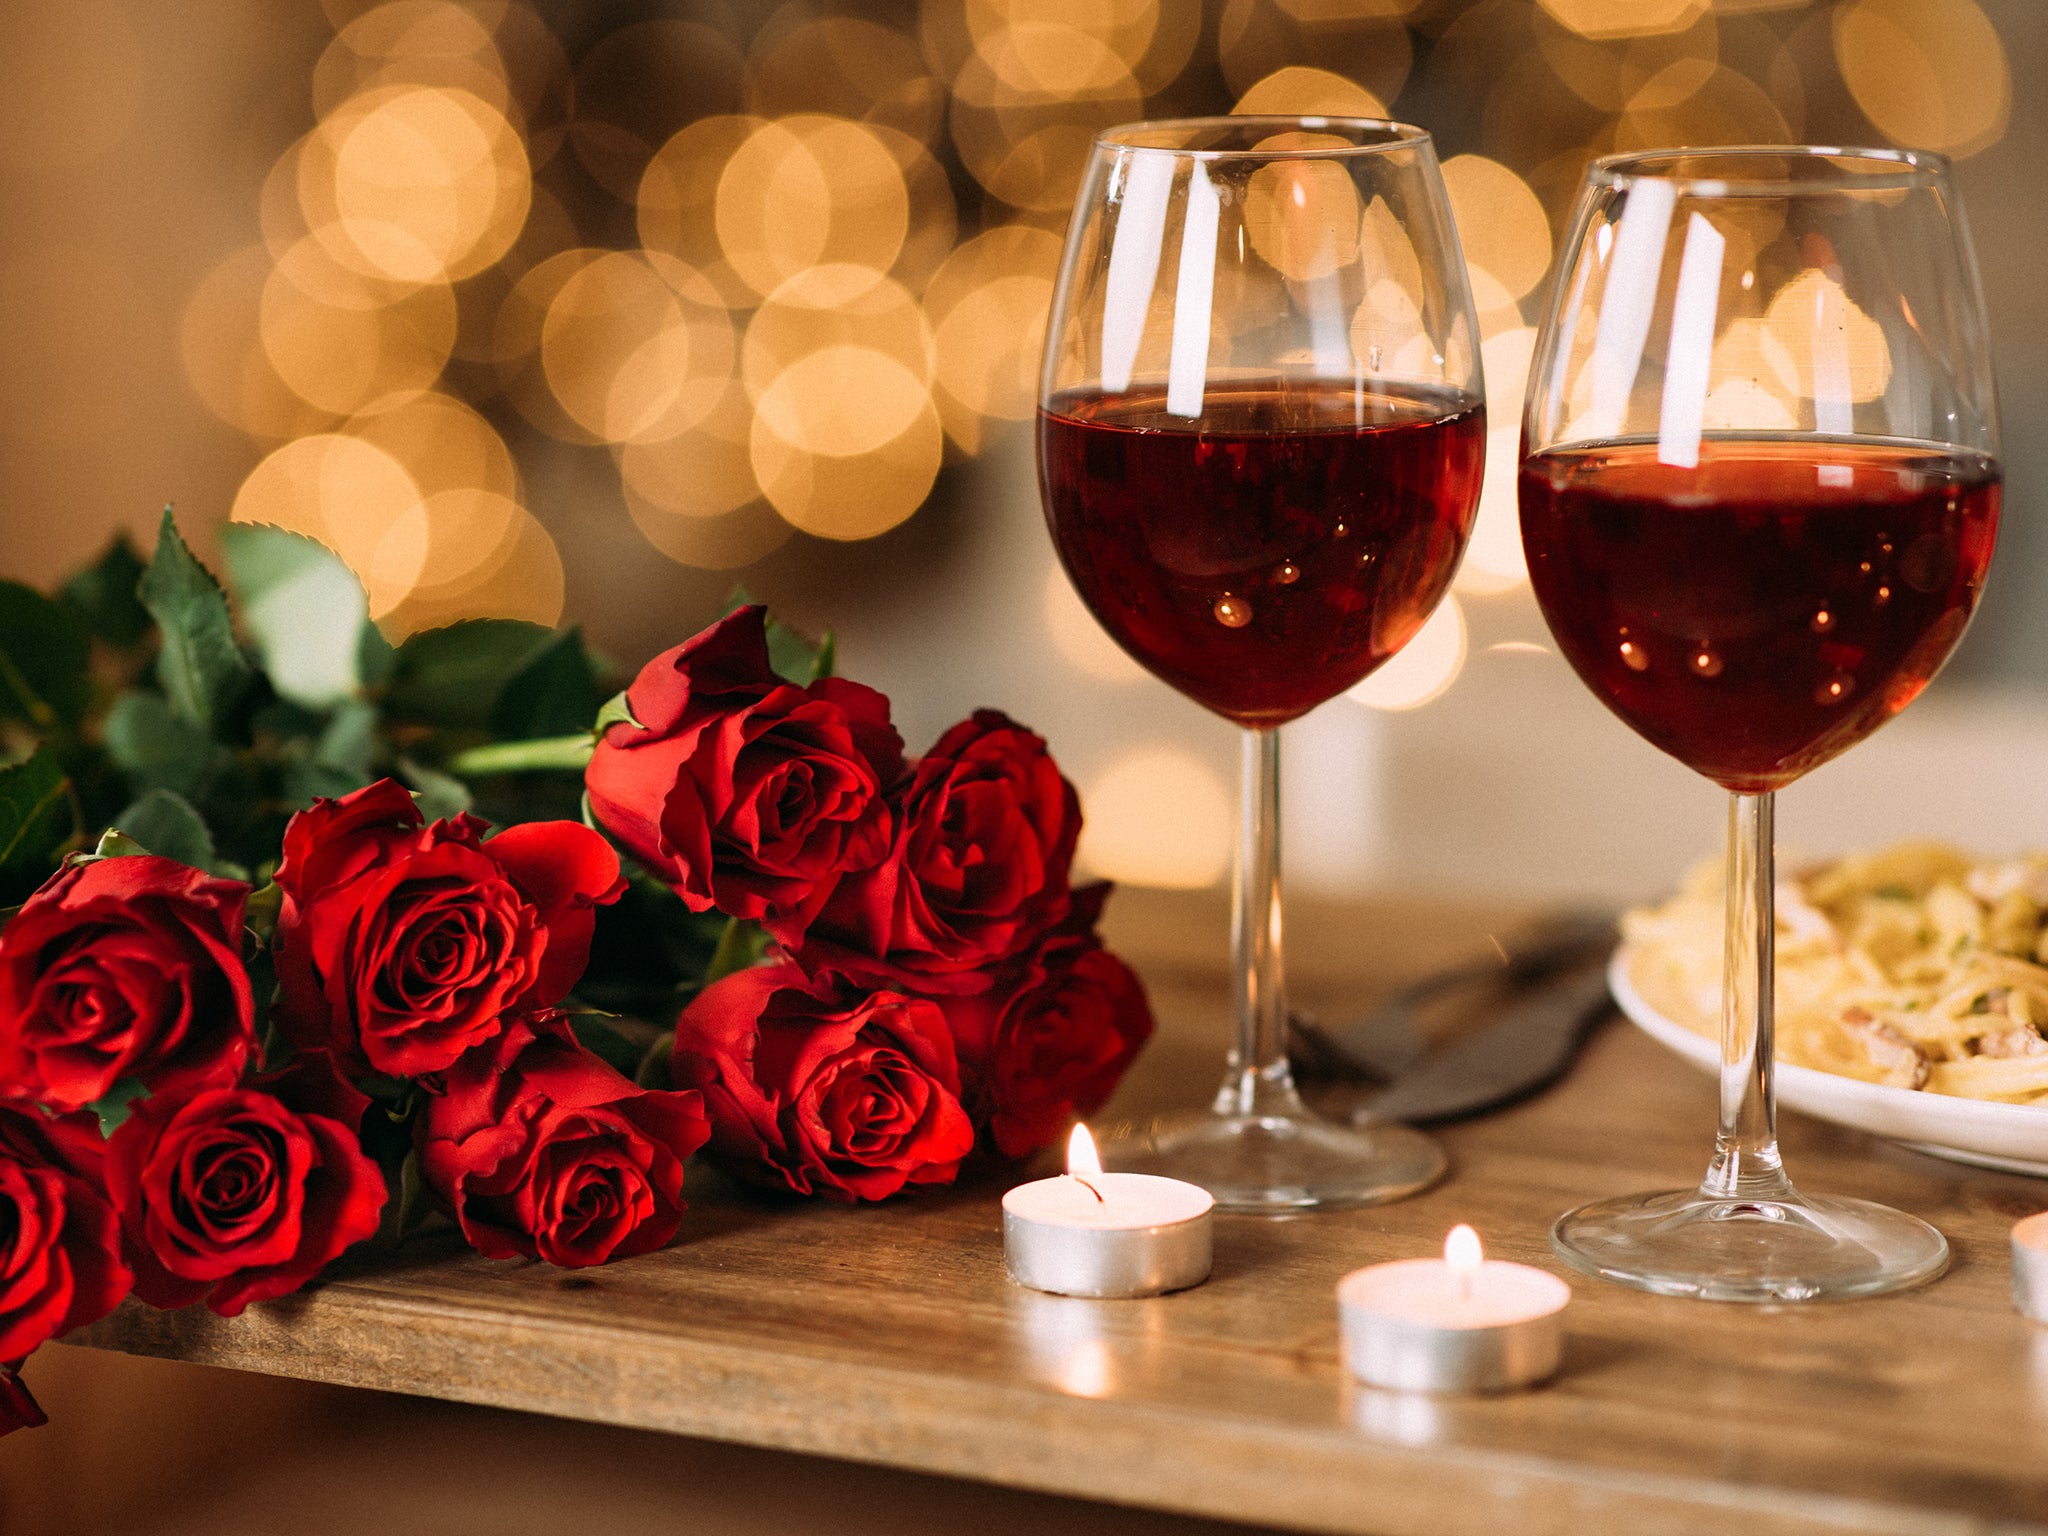 Get 20% off Valentine's Day wines at Perfect Cellar | The Independent